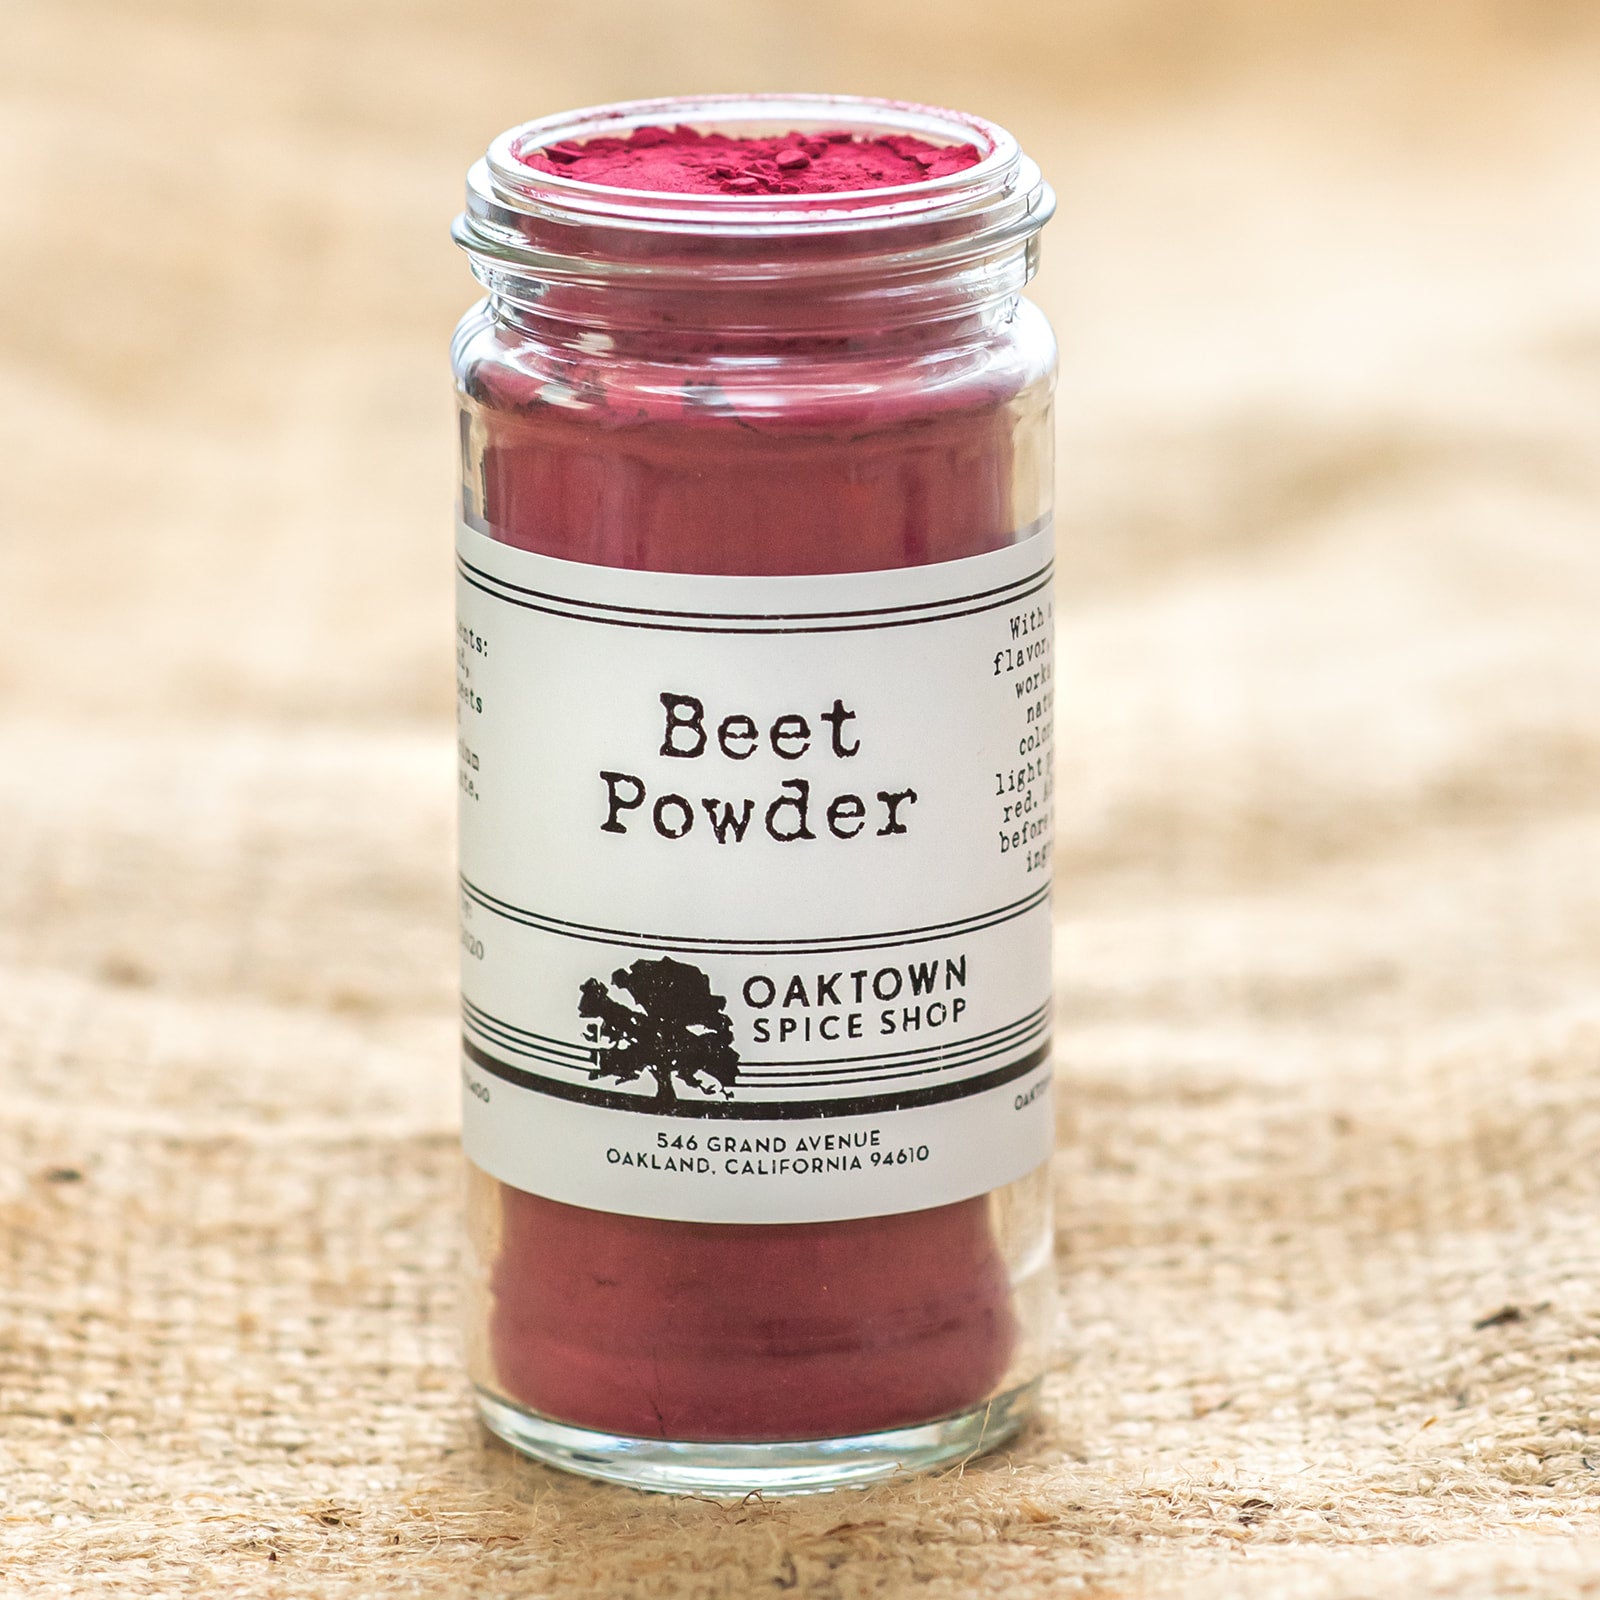 Beet Powder used for Flavoring and Natural Food Coloring  by Oaktown Spice Shop